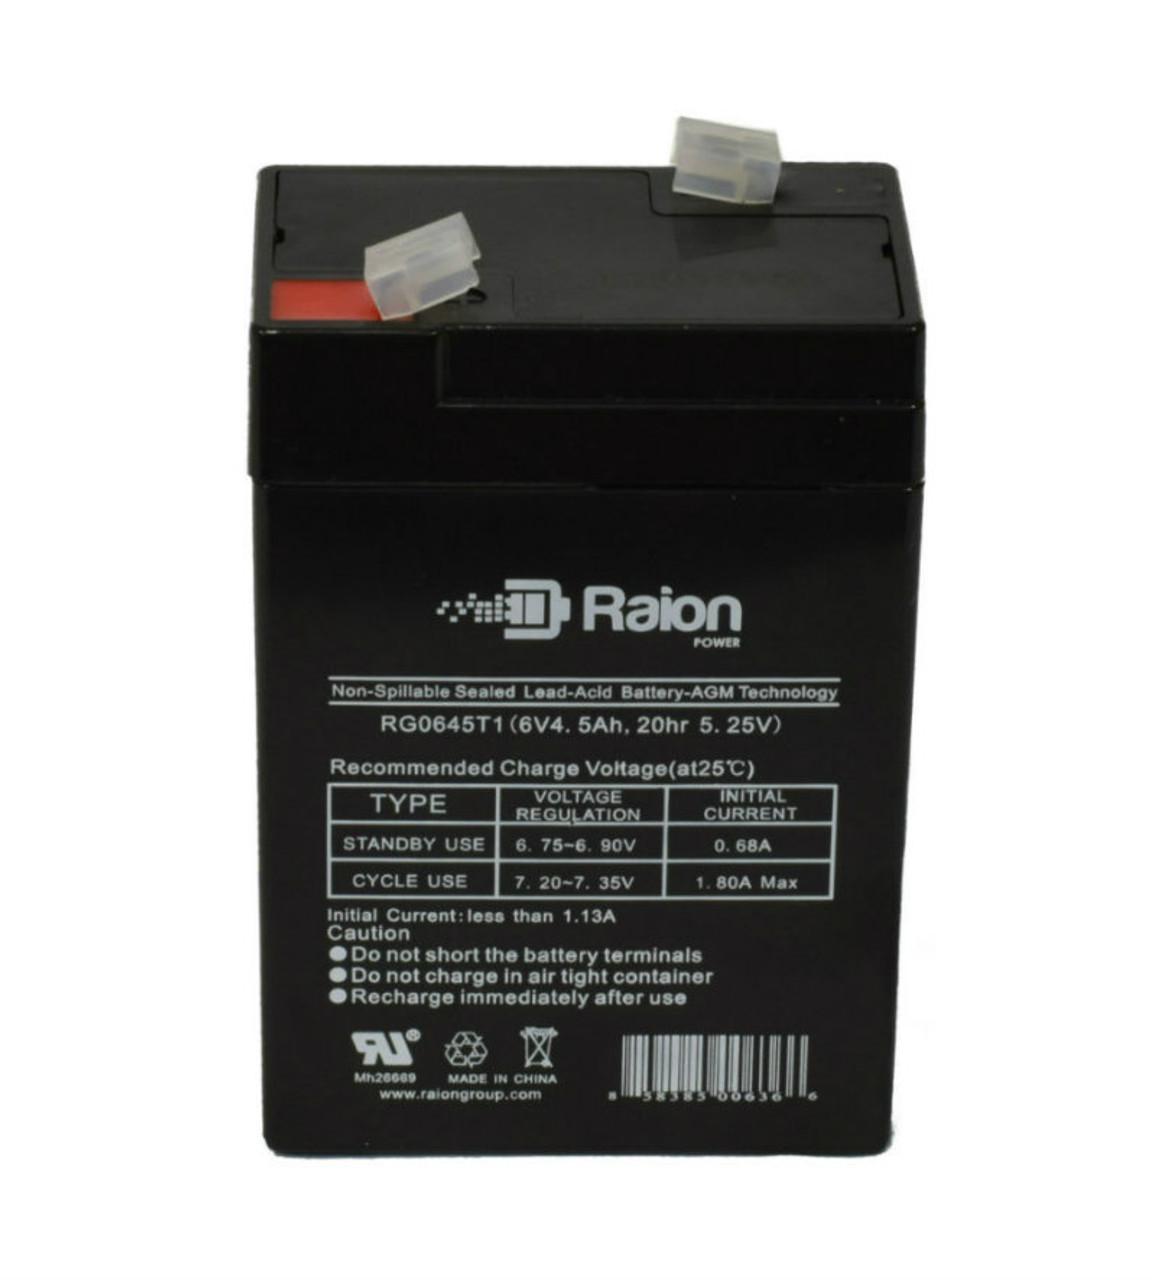 Raion Power RG0645T1 Replacement Battery Cartridge for Power Energy HR6-24W